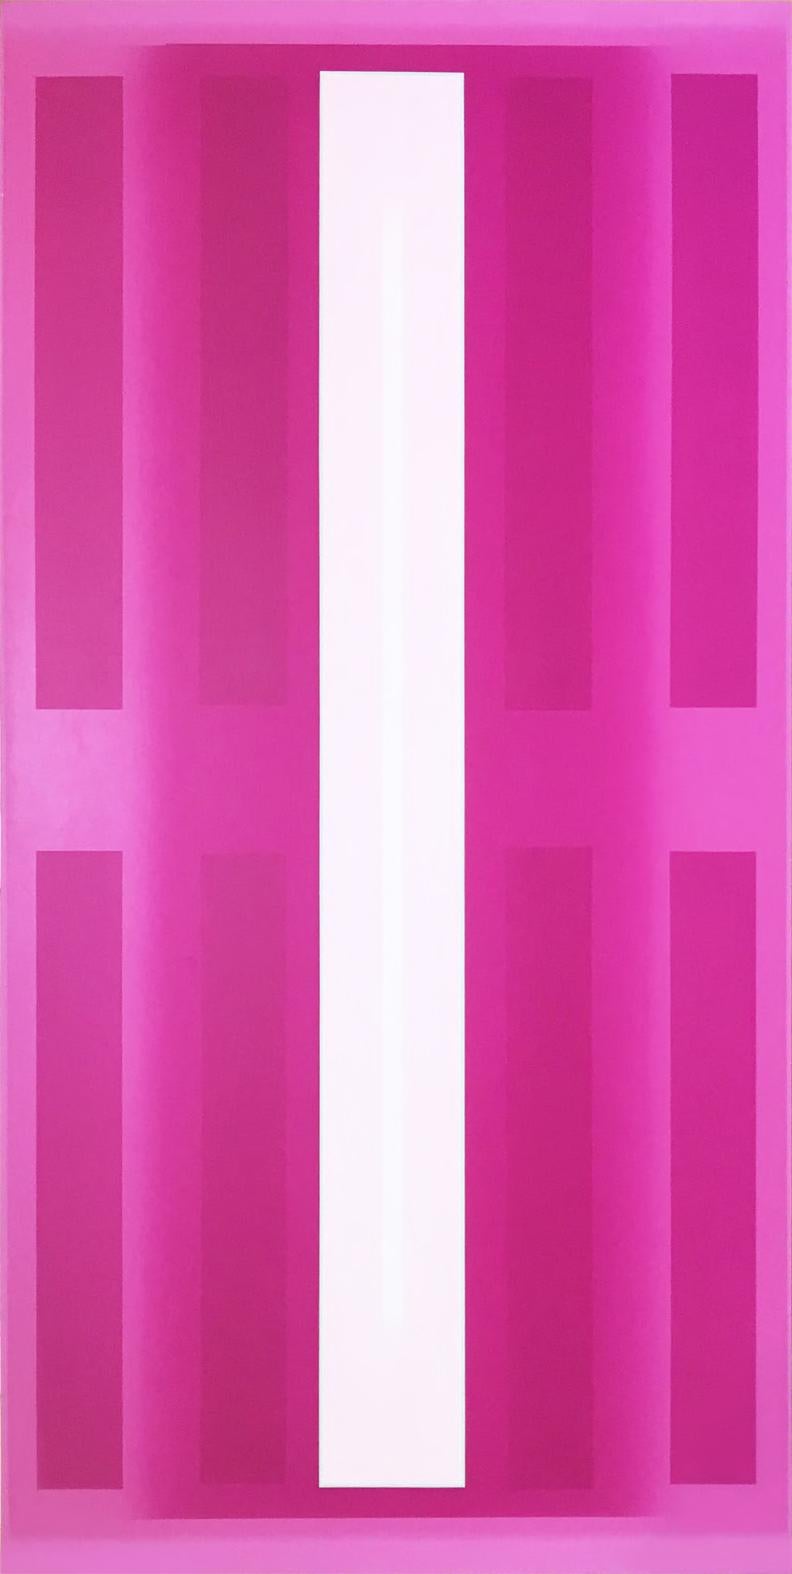 Lucas Blok Abstract Painting - Minimalist Abstract Magenta Color-field Painting on Canvas - Untitled, 11-24-14